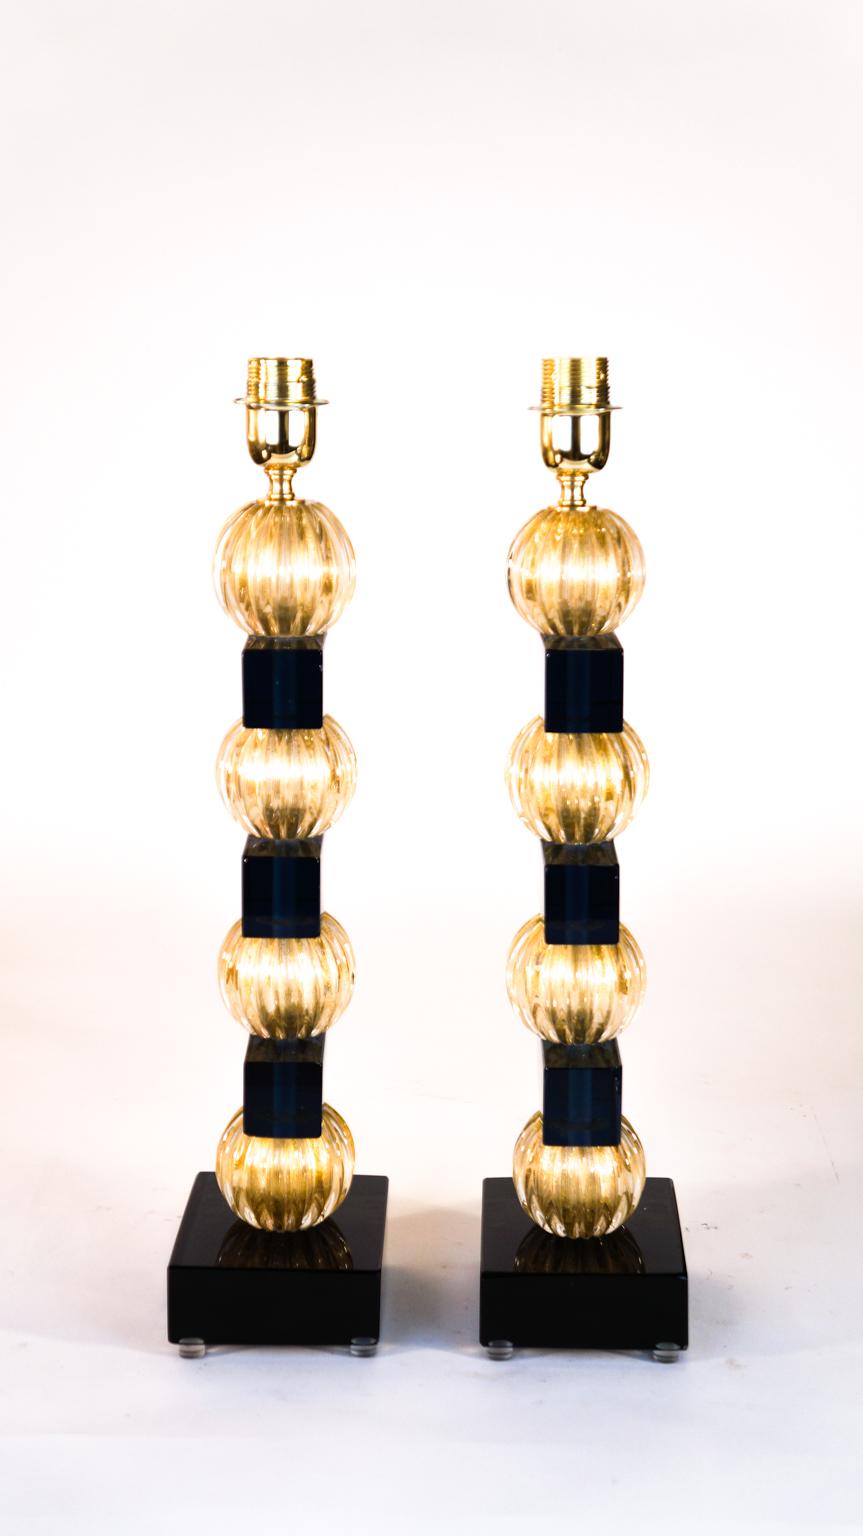 Alberto Donà Murano Pair of Blue Gold Venetian Glass Table Lamps, 1980s For Sale 7